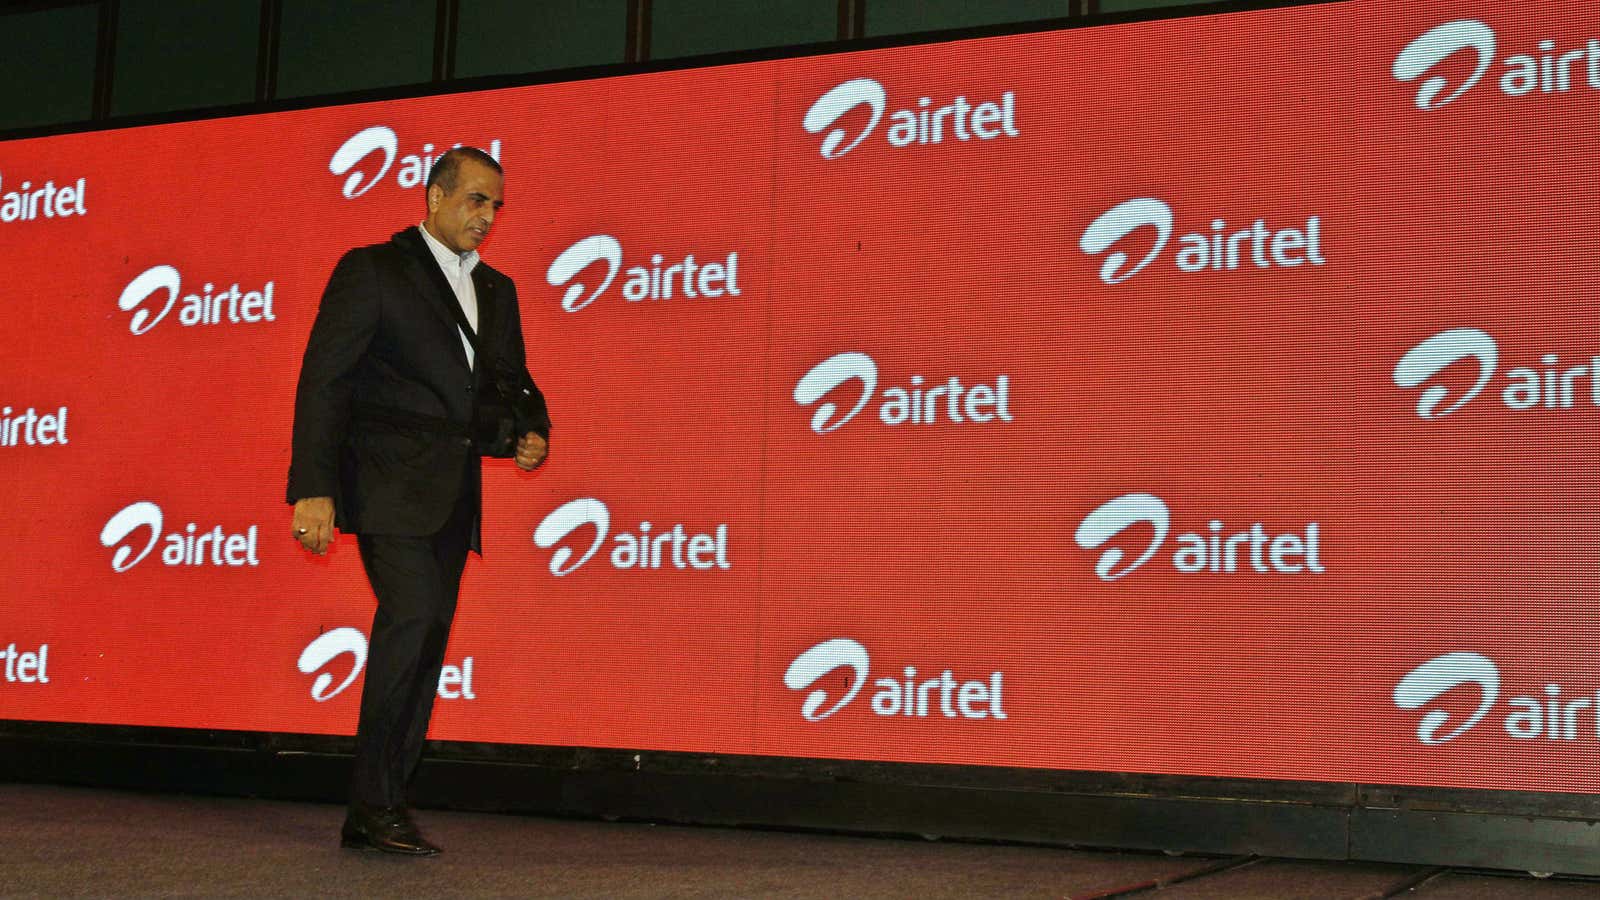 Chairman and Managing Director of Bharti Airtel Ltd. Sunil Mittal walks as he attends a press conference during the launch of Airtel’s 4G services, in…